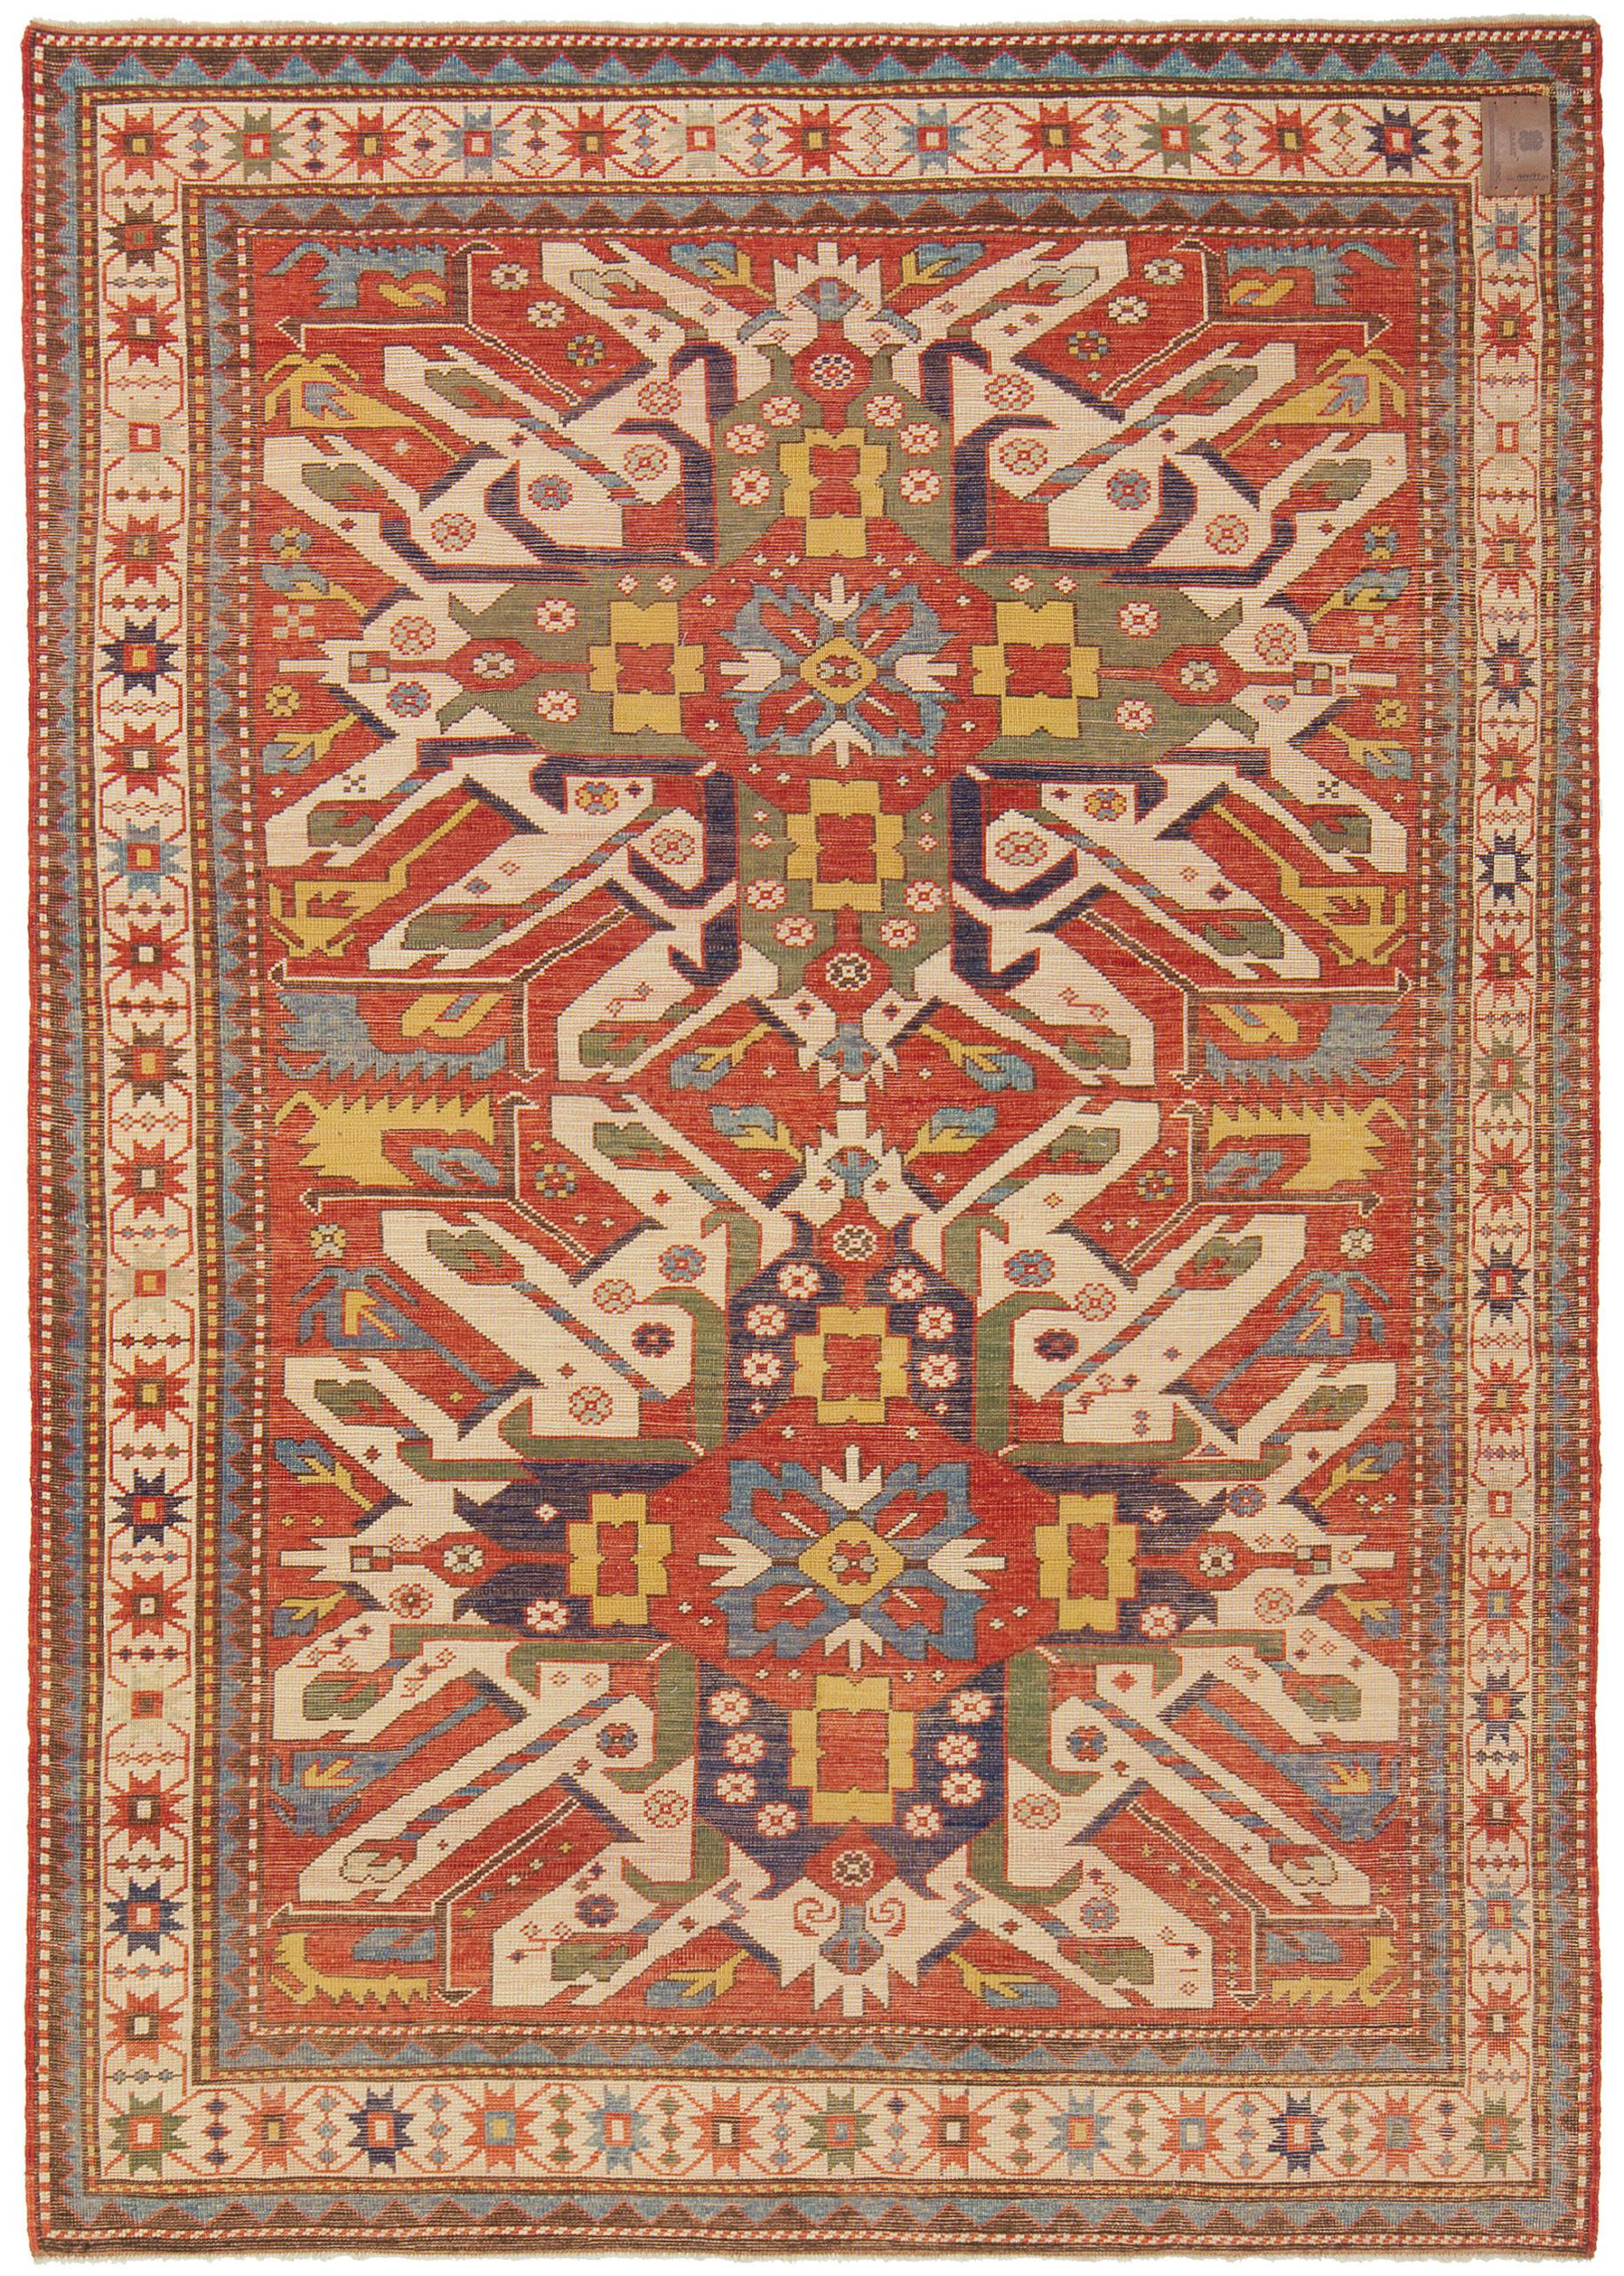 The design source of the rug comes from the book Tapis du Caucase – Rugs of the Caucasus, Ian Bennett & Aziz Bassoul, The Nicholas Sursock Museum, Beirut, Lebanon 2003, nr.29 and Oriental Rugs Volume 1 Caucasian, Ian Bennett, Oriental Textile Press,